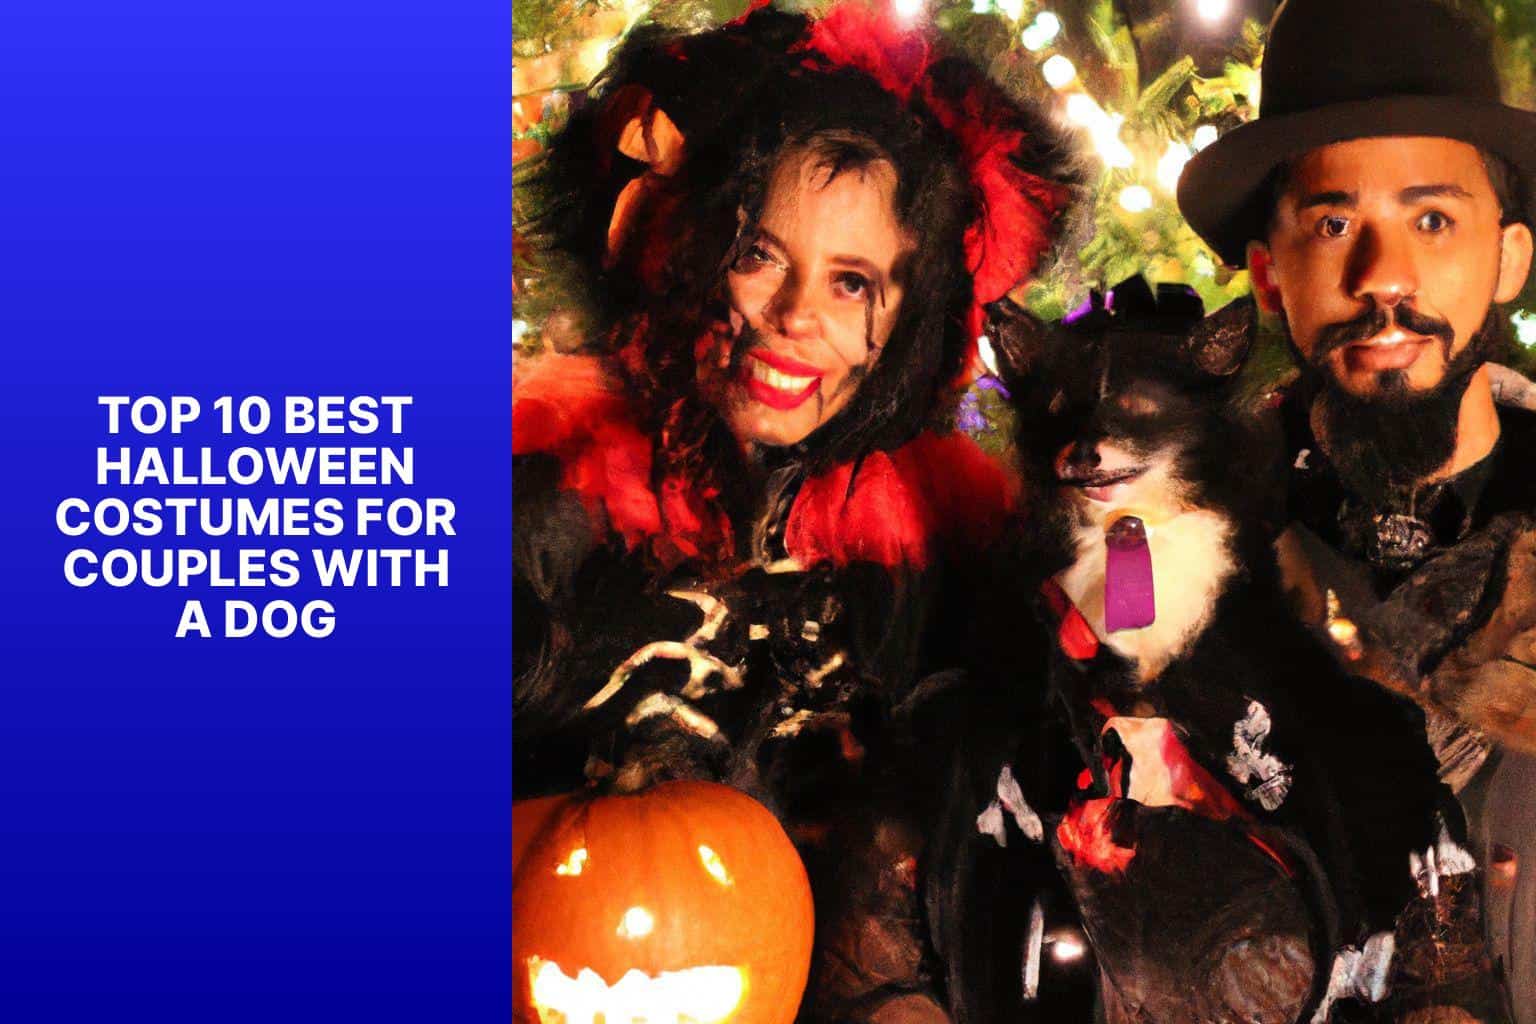 Top 10 Best Halloween Costumes for Couples with a Dog - best halloween costumes for couples with a dog 